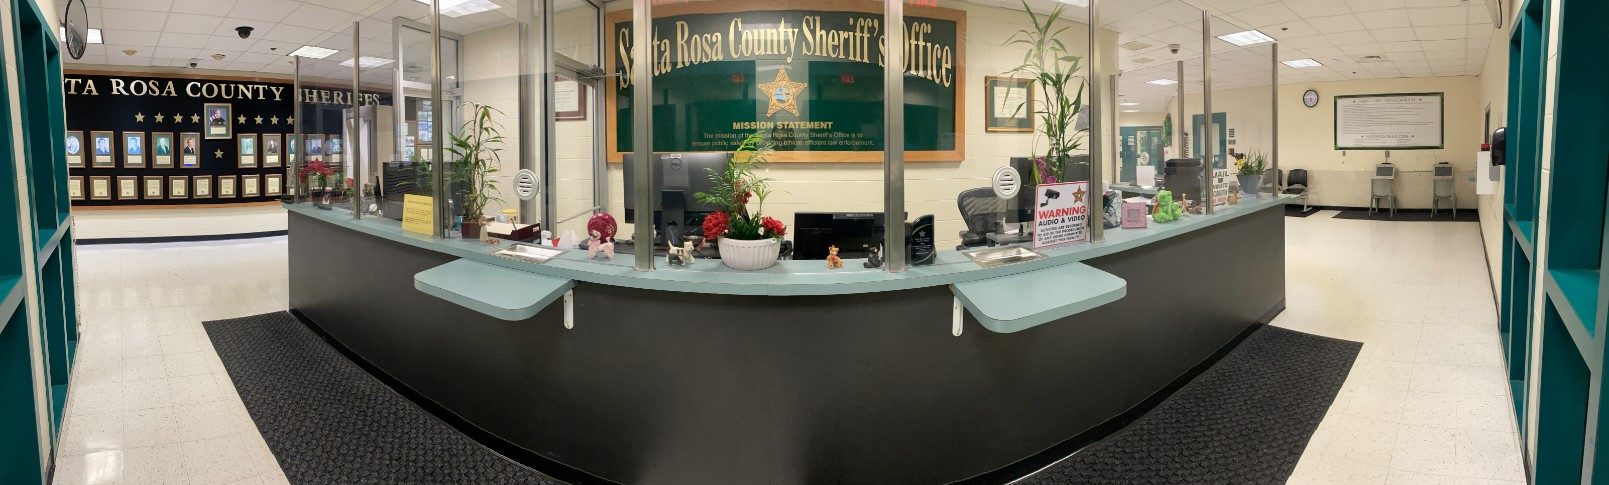 Interior view of the santa rosa county sheriff's office reception area with a curved counter, informational signs, and decorations.